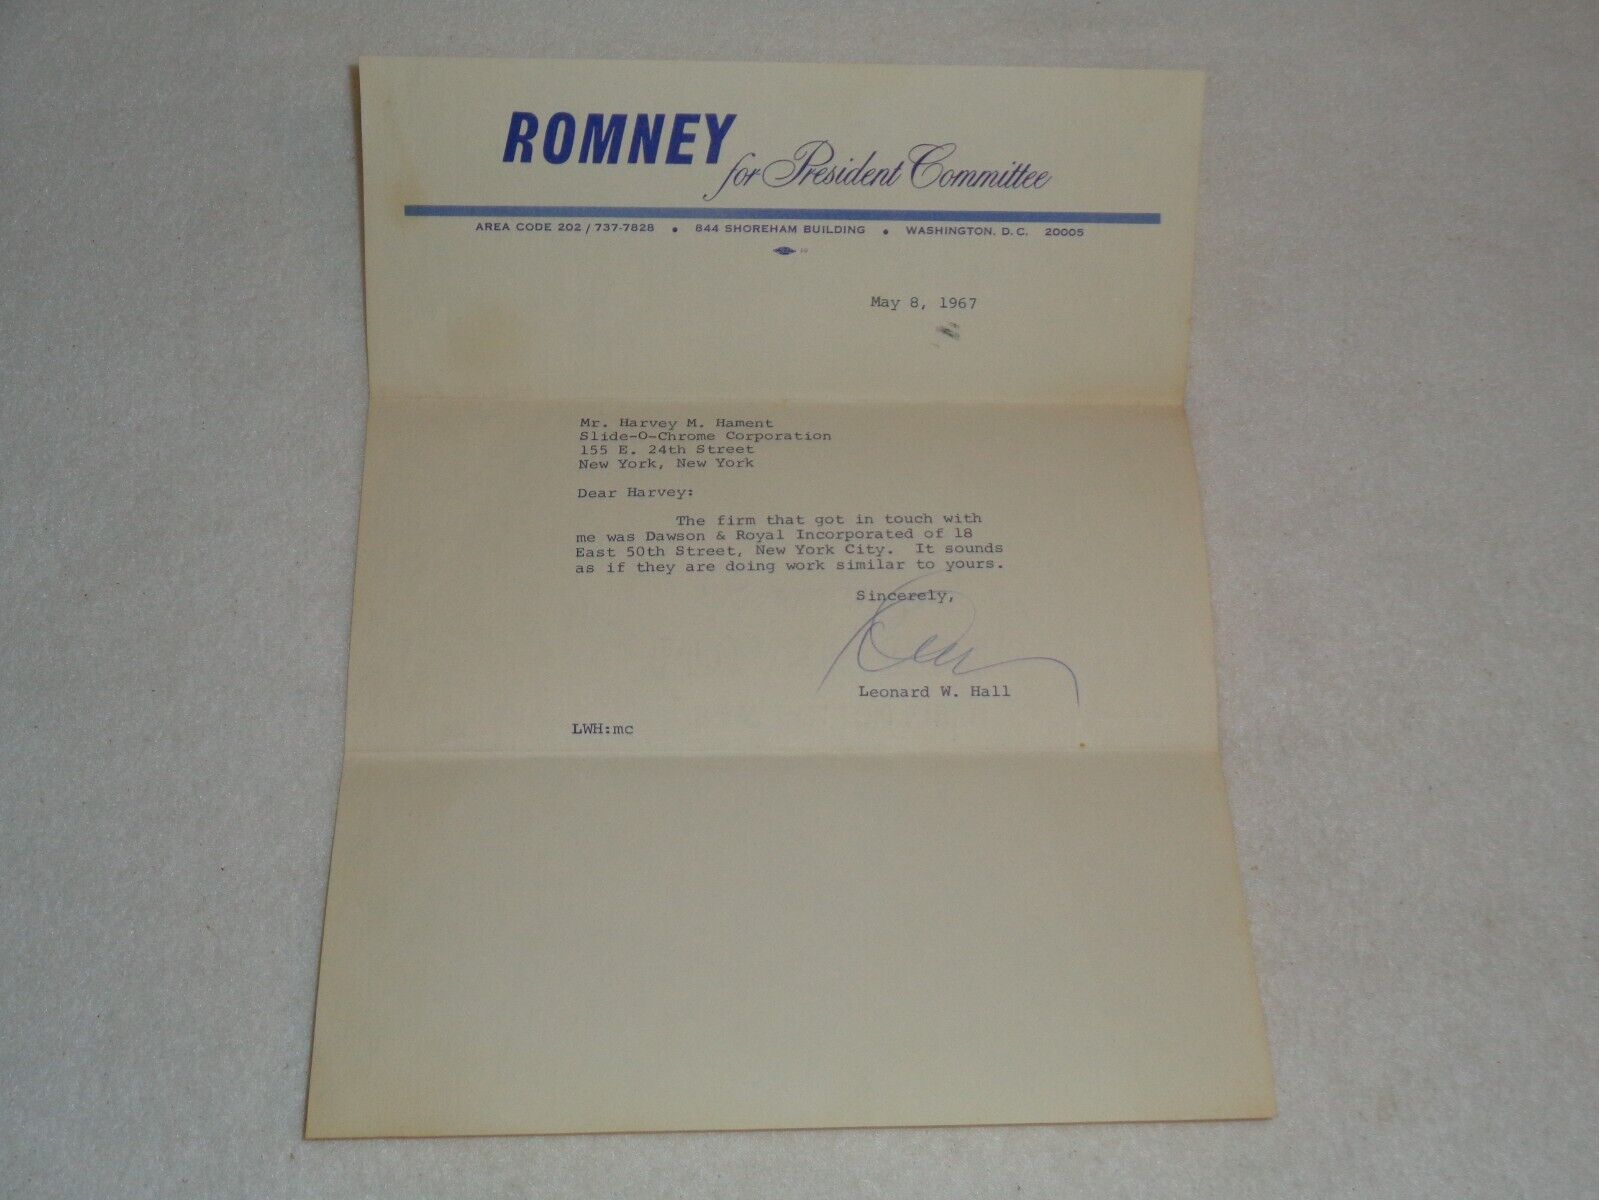 George Romney for President Committee 1967 Letter Signed by Leonard W. Hall